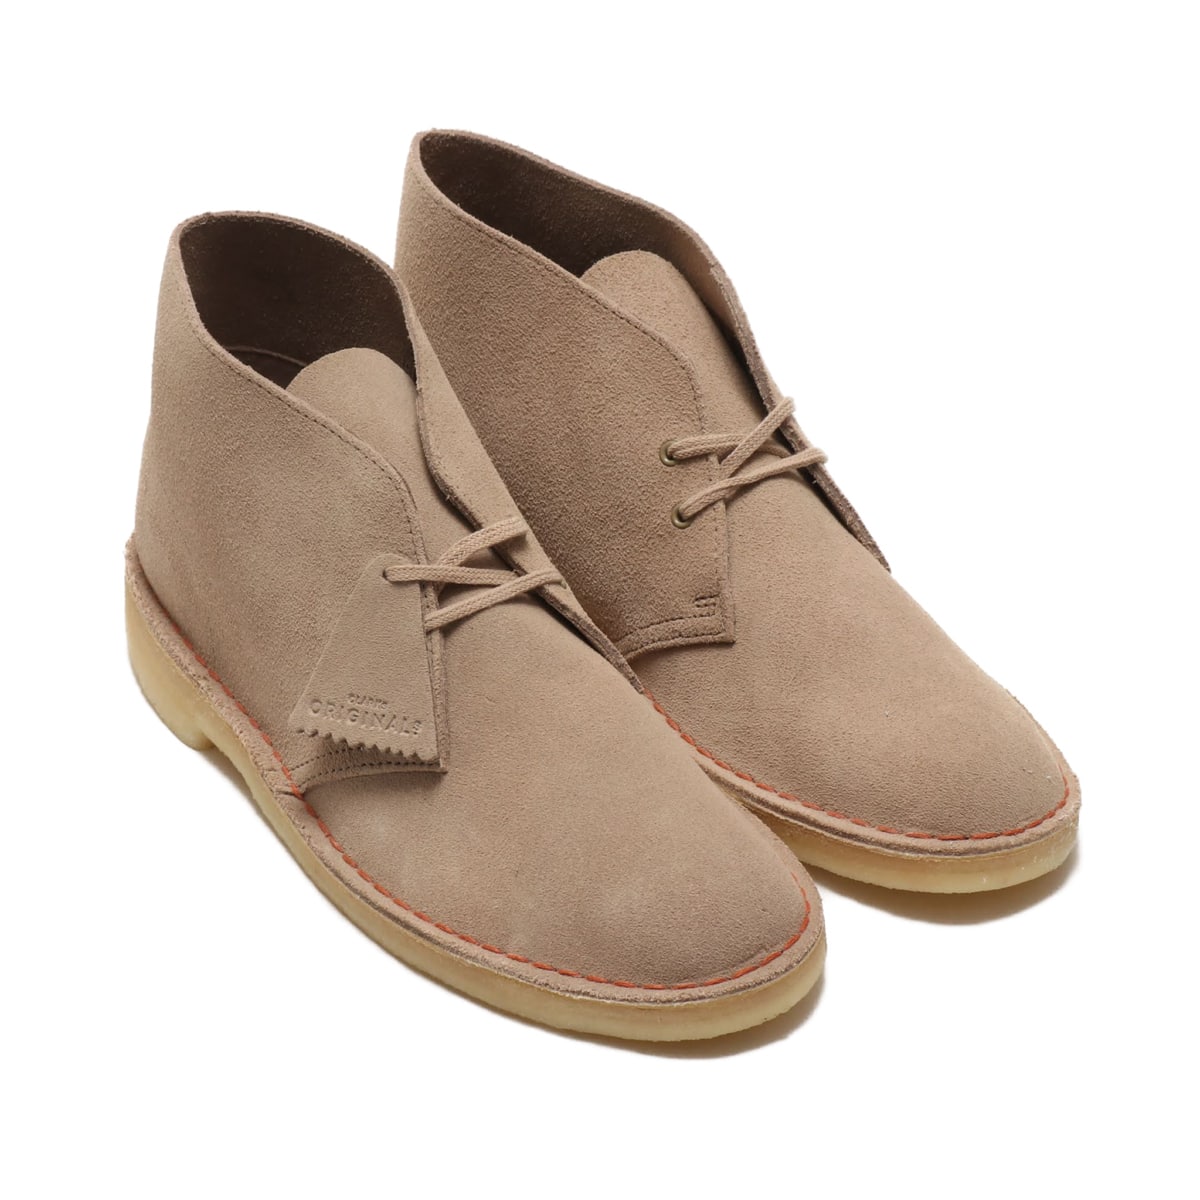 Clarks BOOT SAND SUEDE 19FA-I